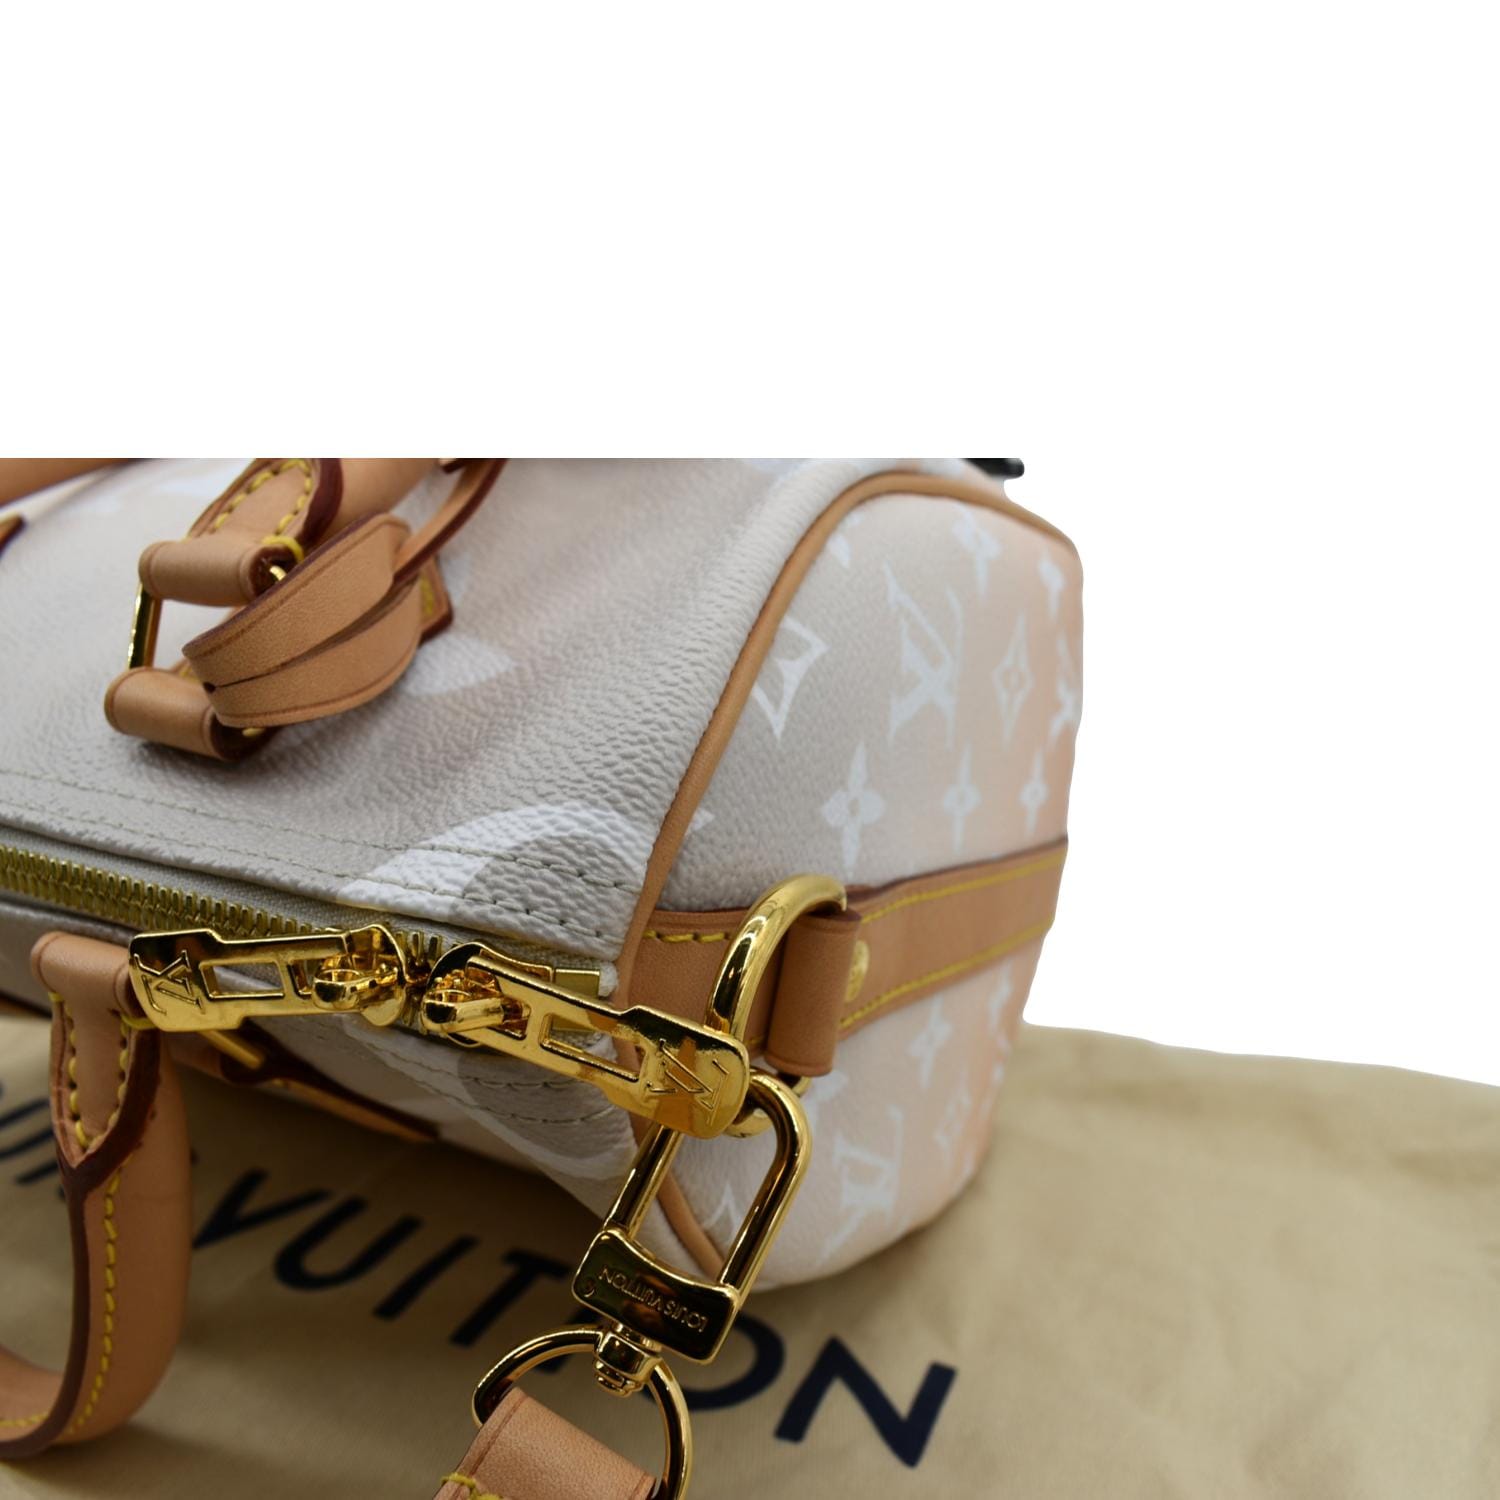 Louis Vuitton Speedy 25 Bandouliere By The Pool Brume Mist Gray